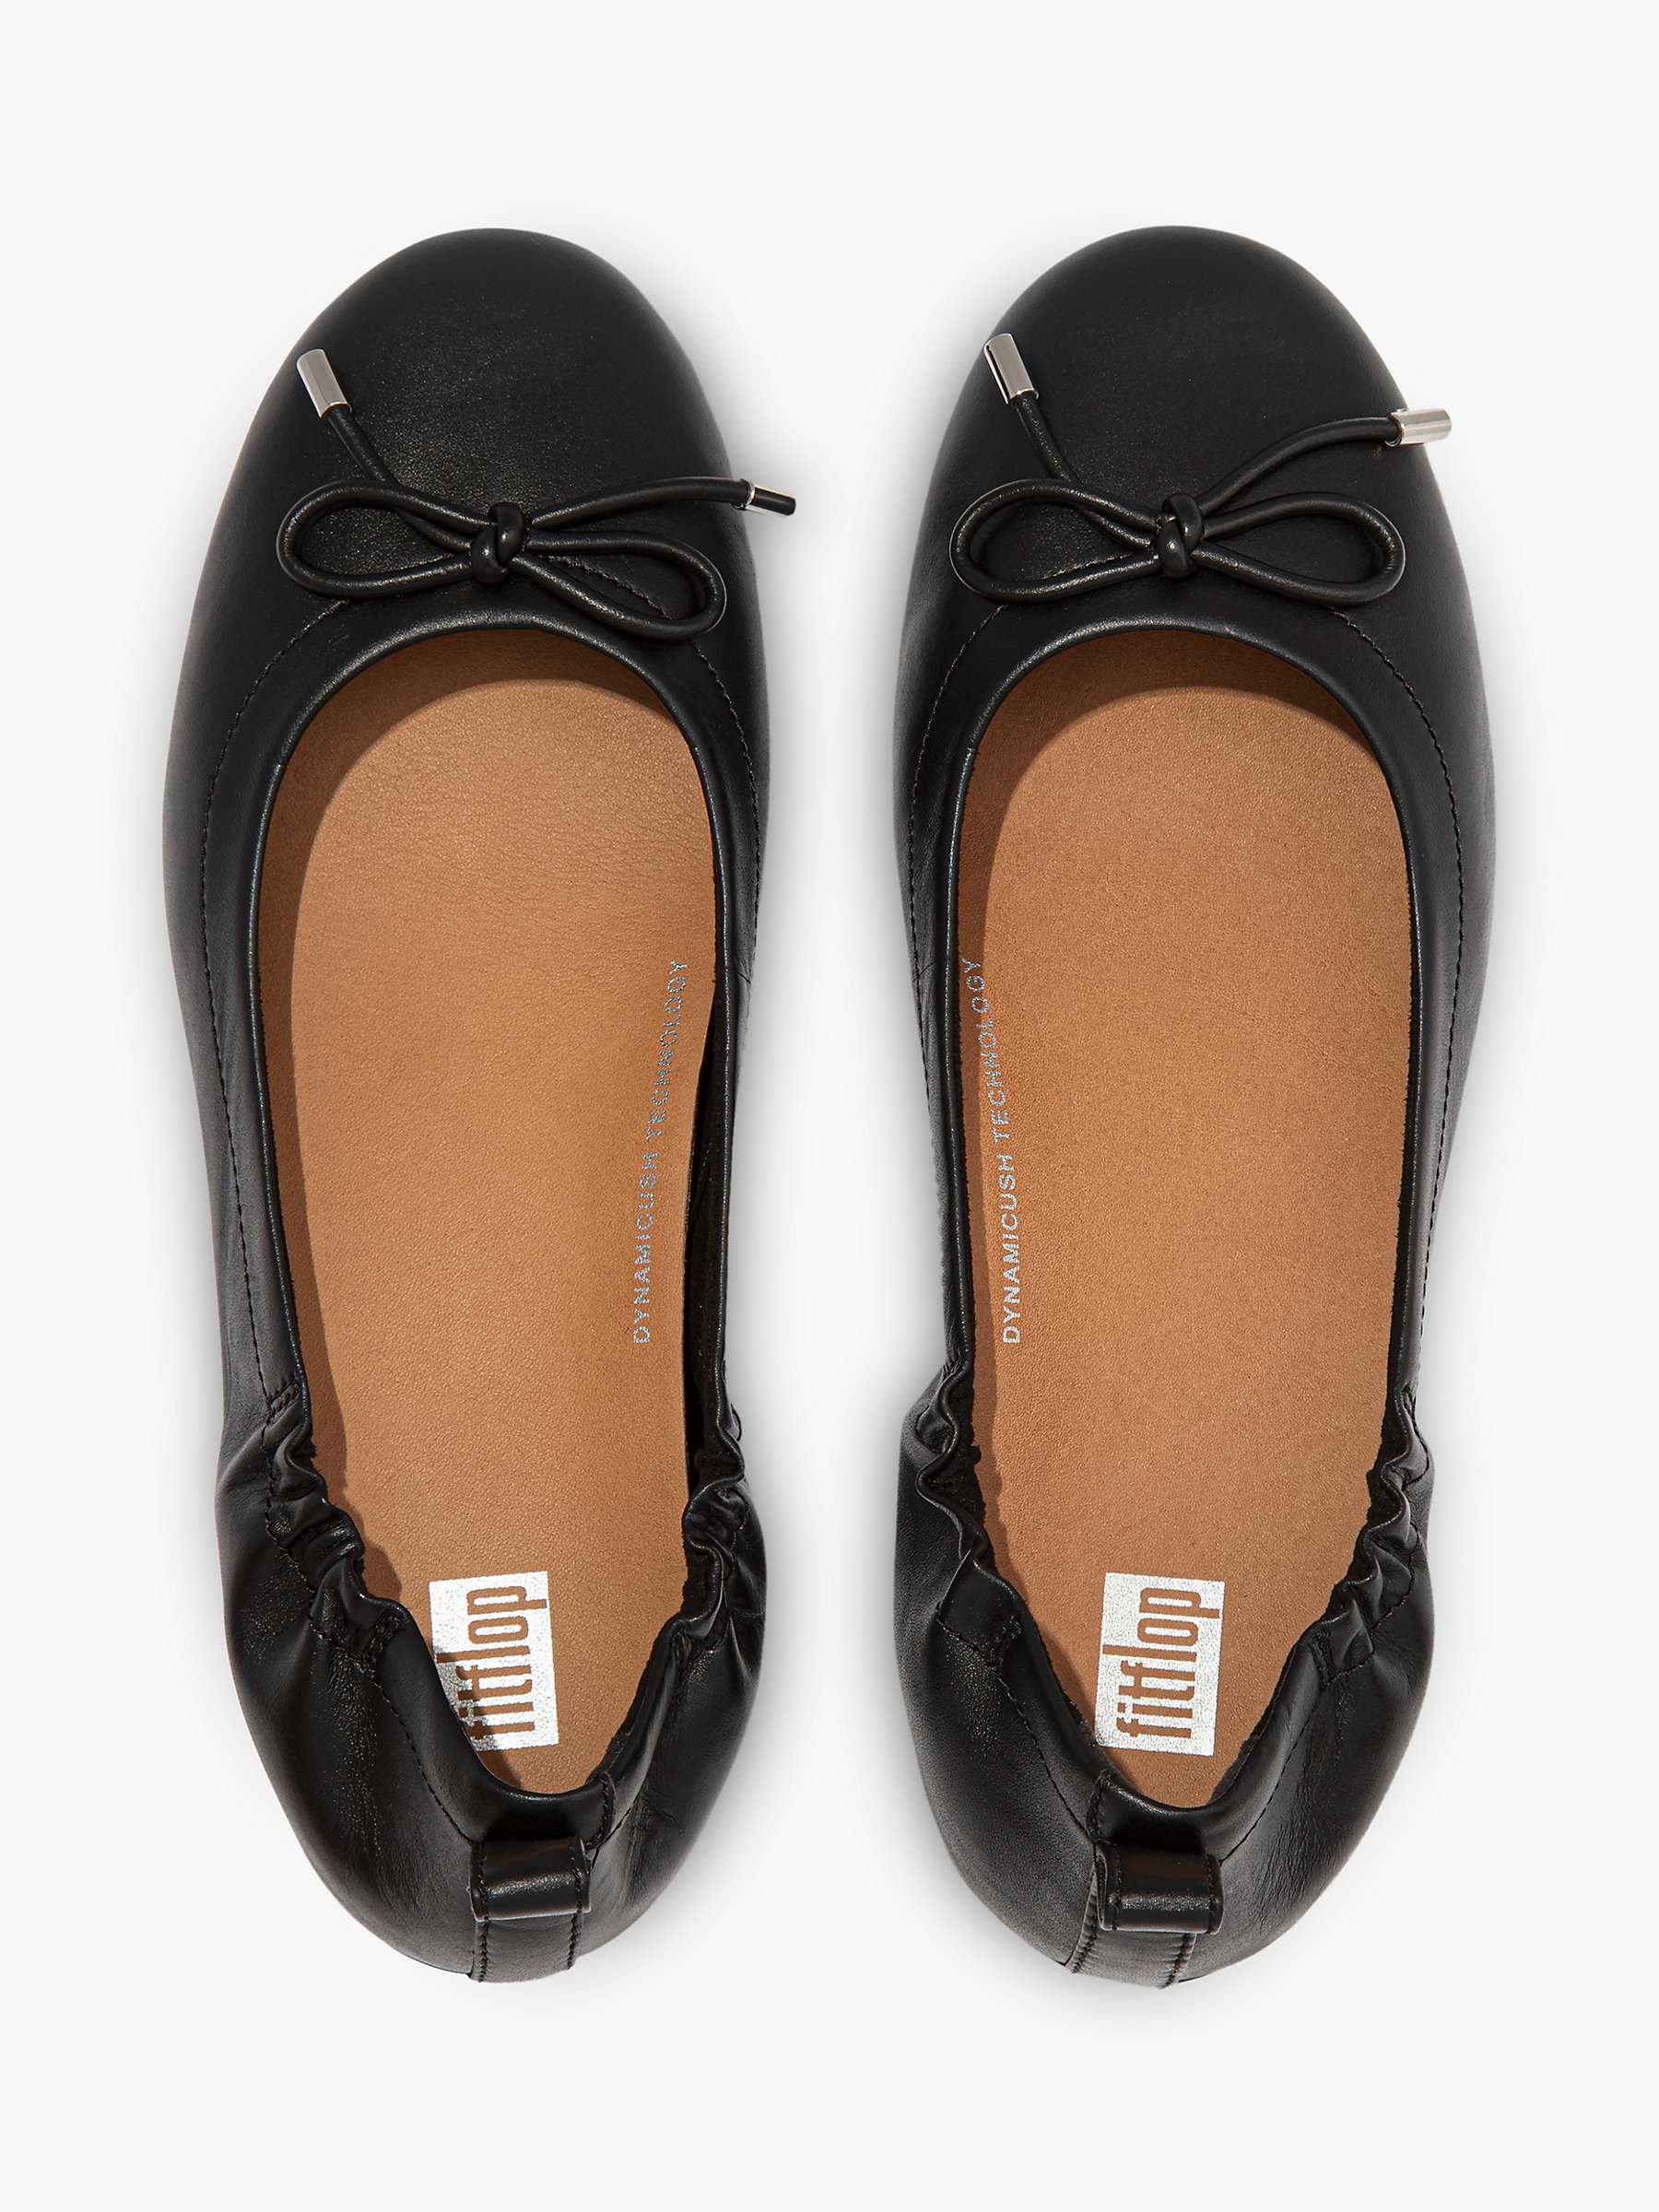 Buy FitFlop Allegro Bow Leather Pumps Online at johnlewis.com